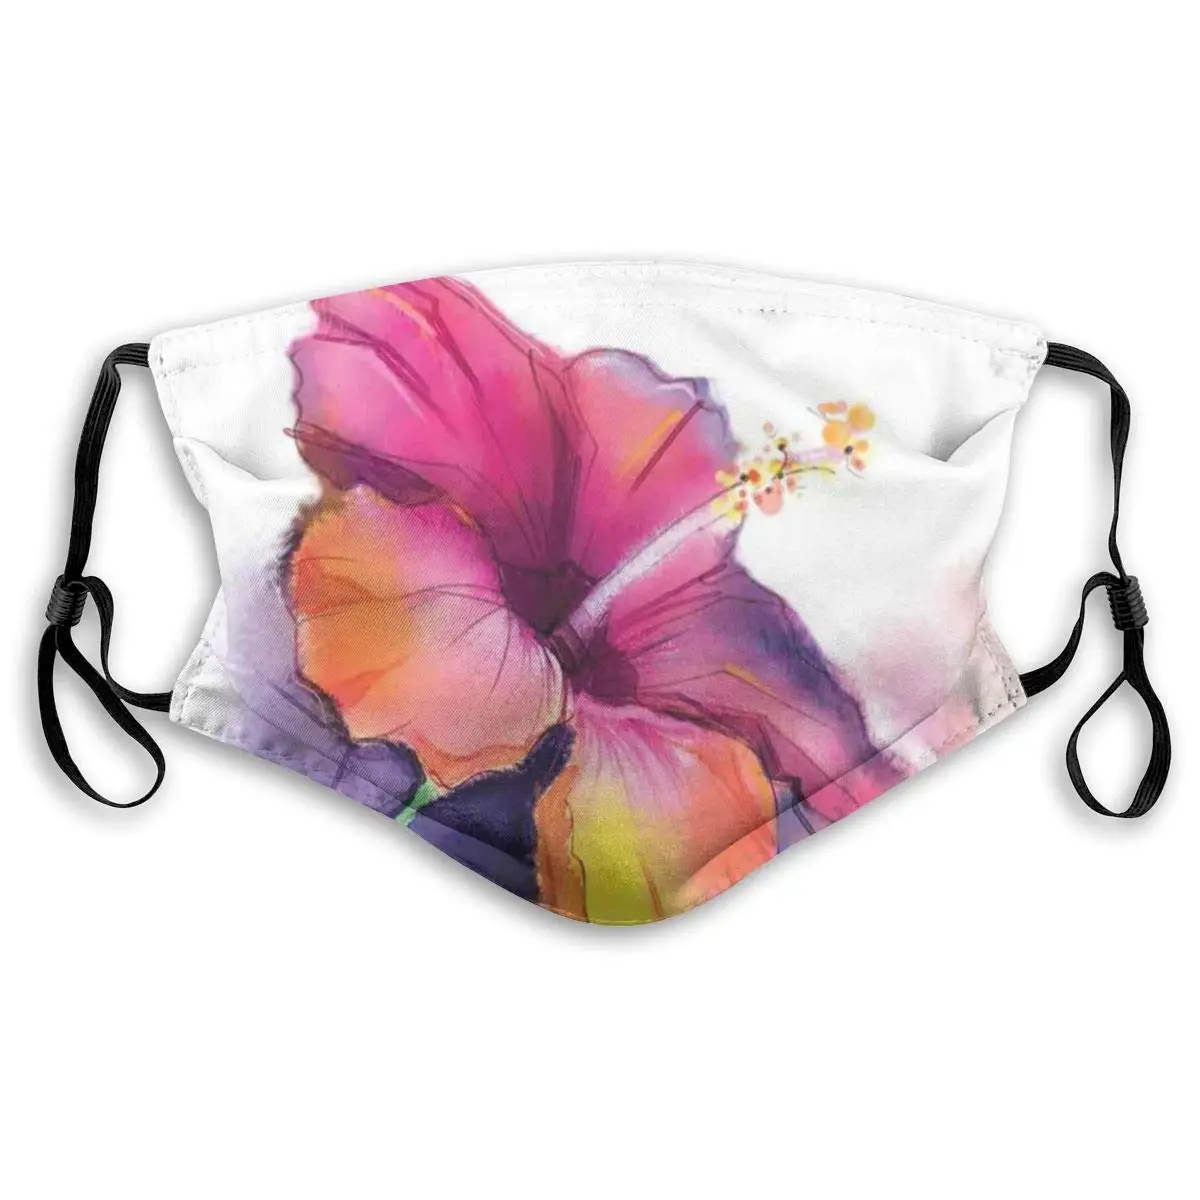 

Fashion Comfortable Windproof mask,Hibiscus Flower In Pastel Abstract Colorful Romantic Petal Pattern Artwork Print,Printed